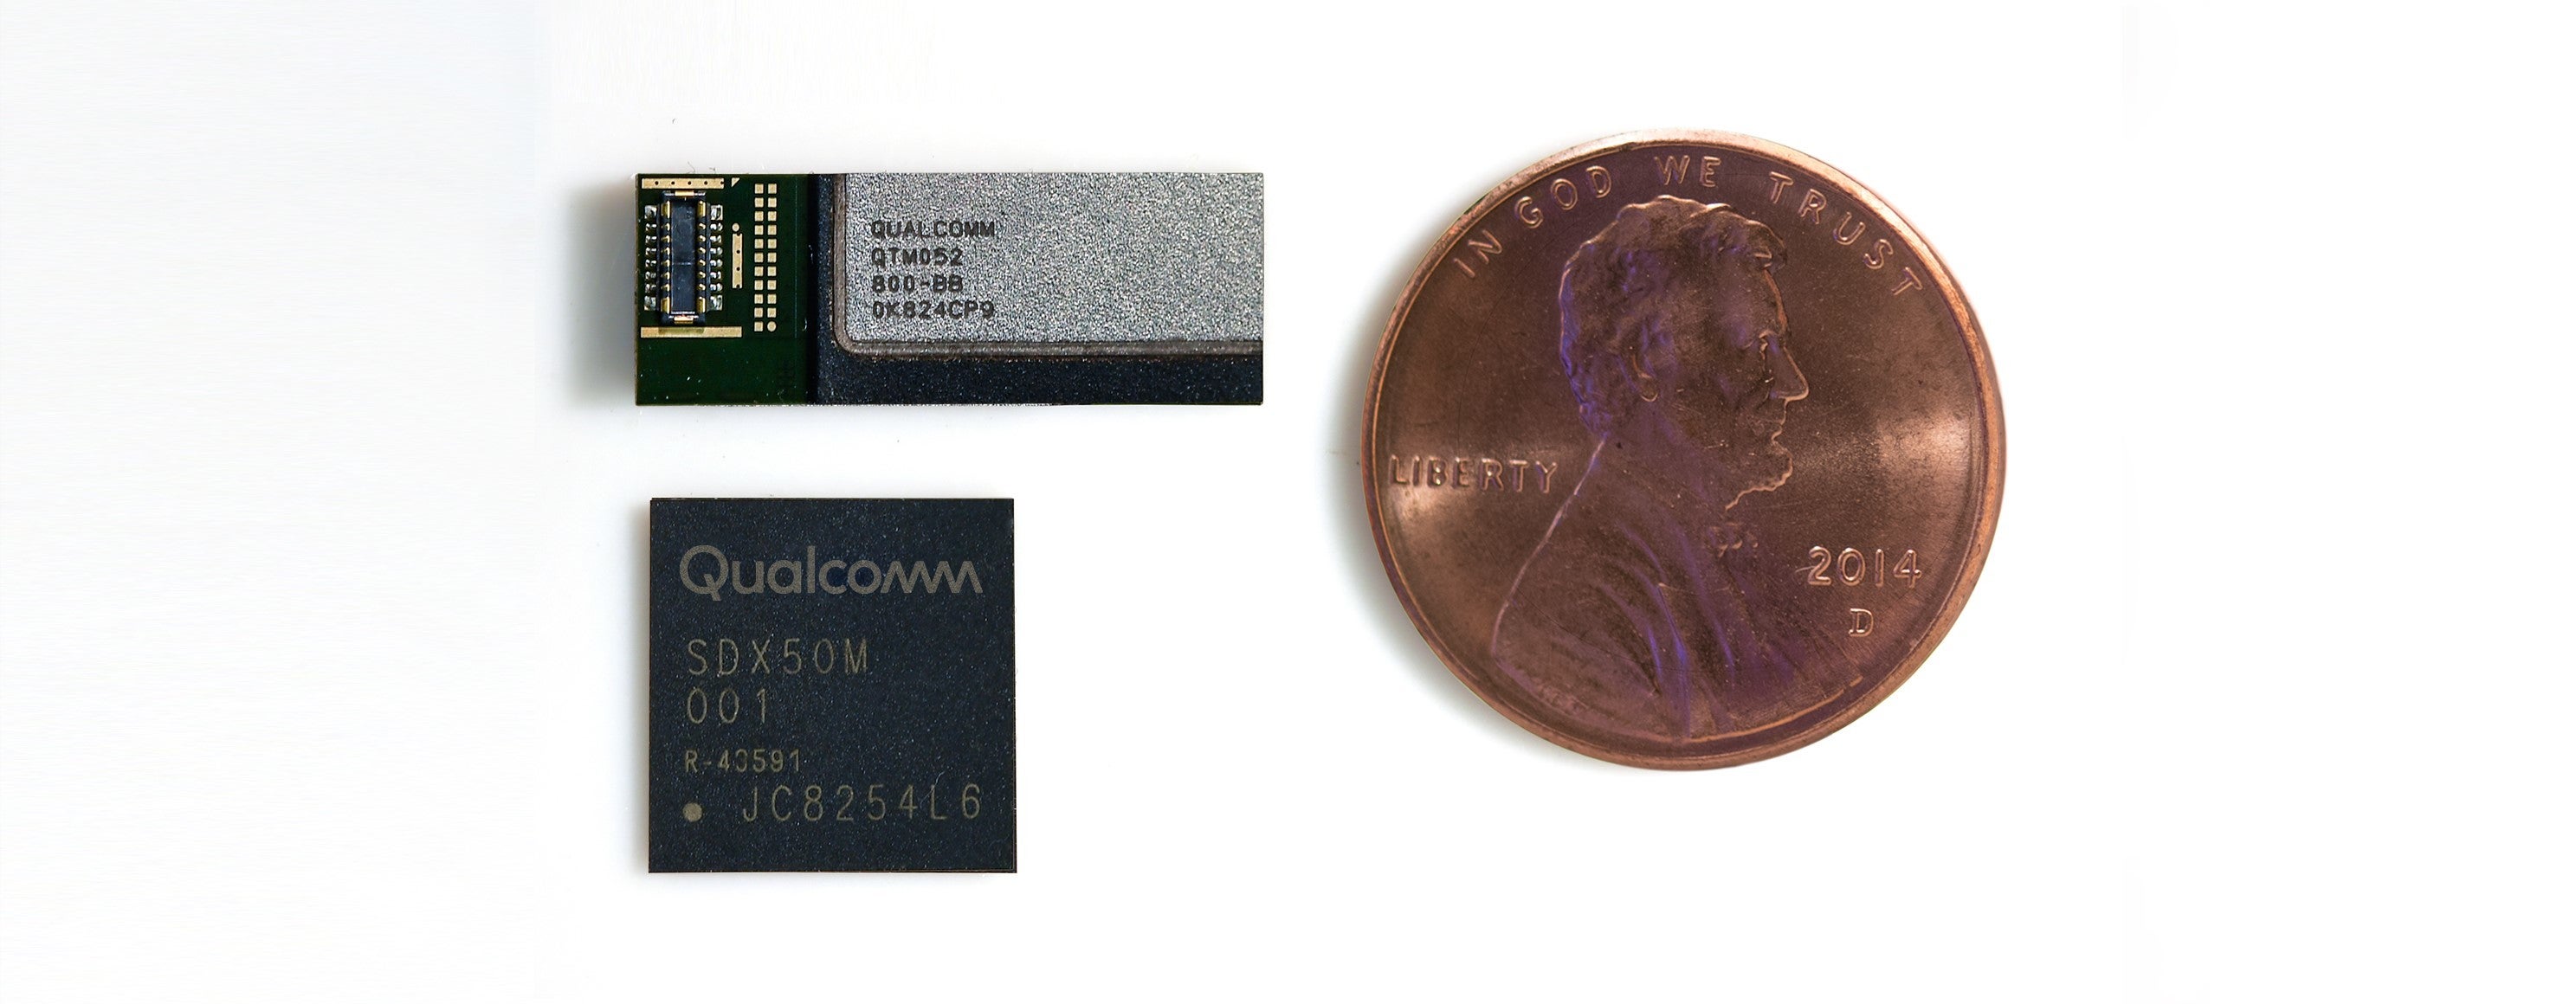 The Qualcomm Snapdragon X50 modem below and a single 5G antenna next to a penny - How long before 5G becomes a standard flagship smartphone feature?